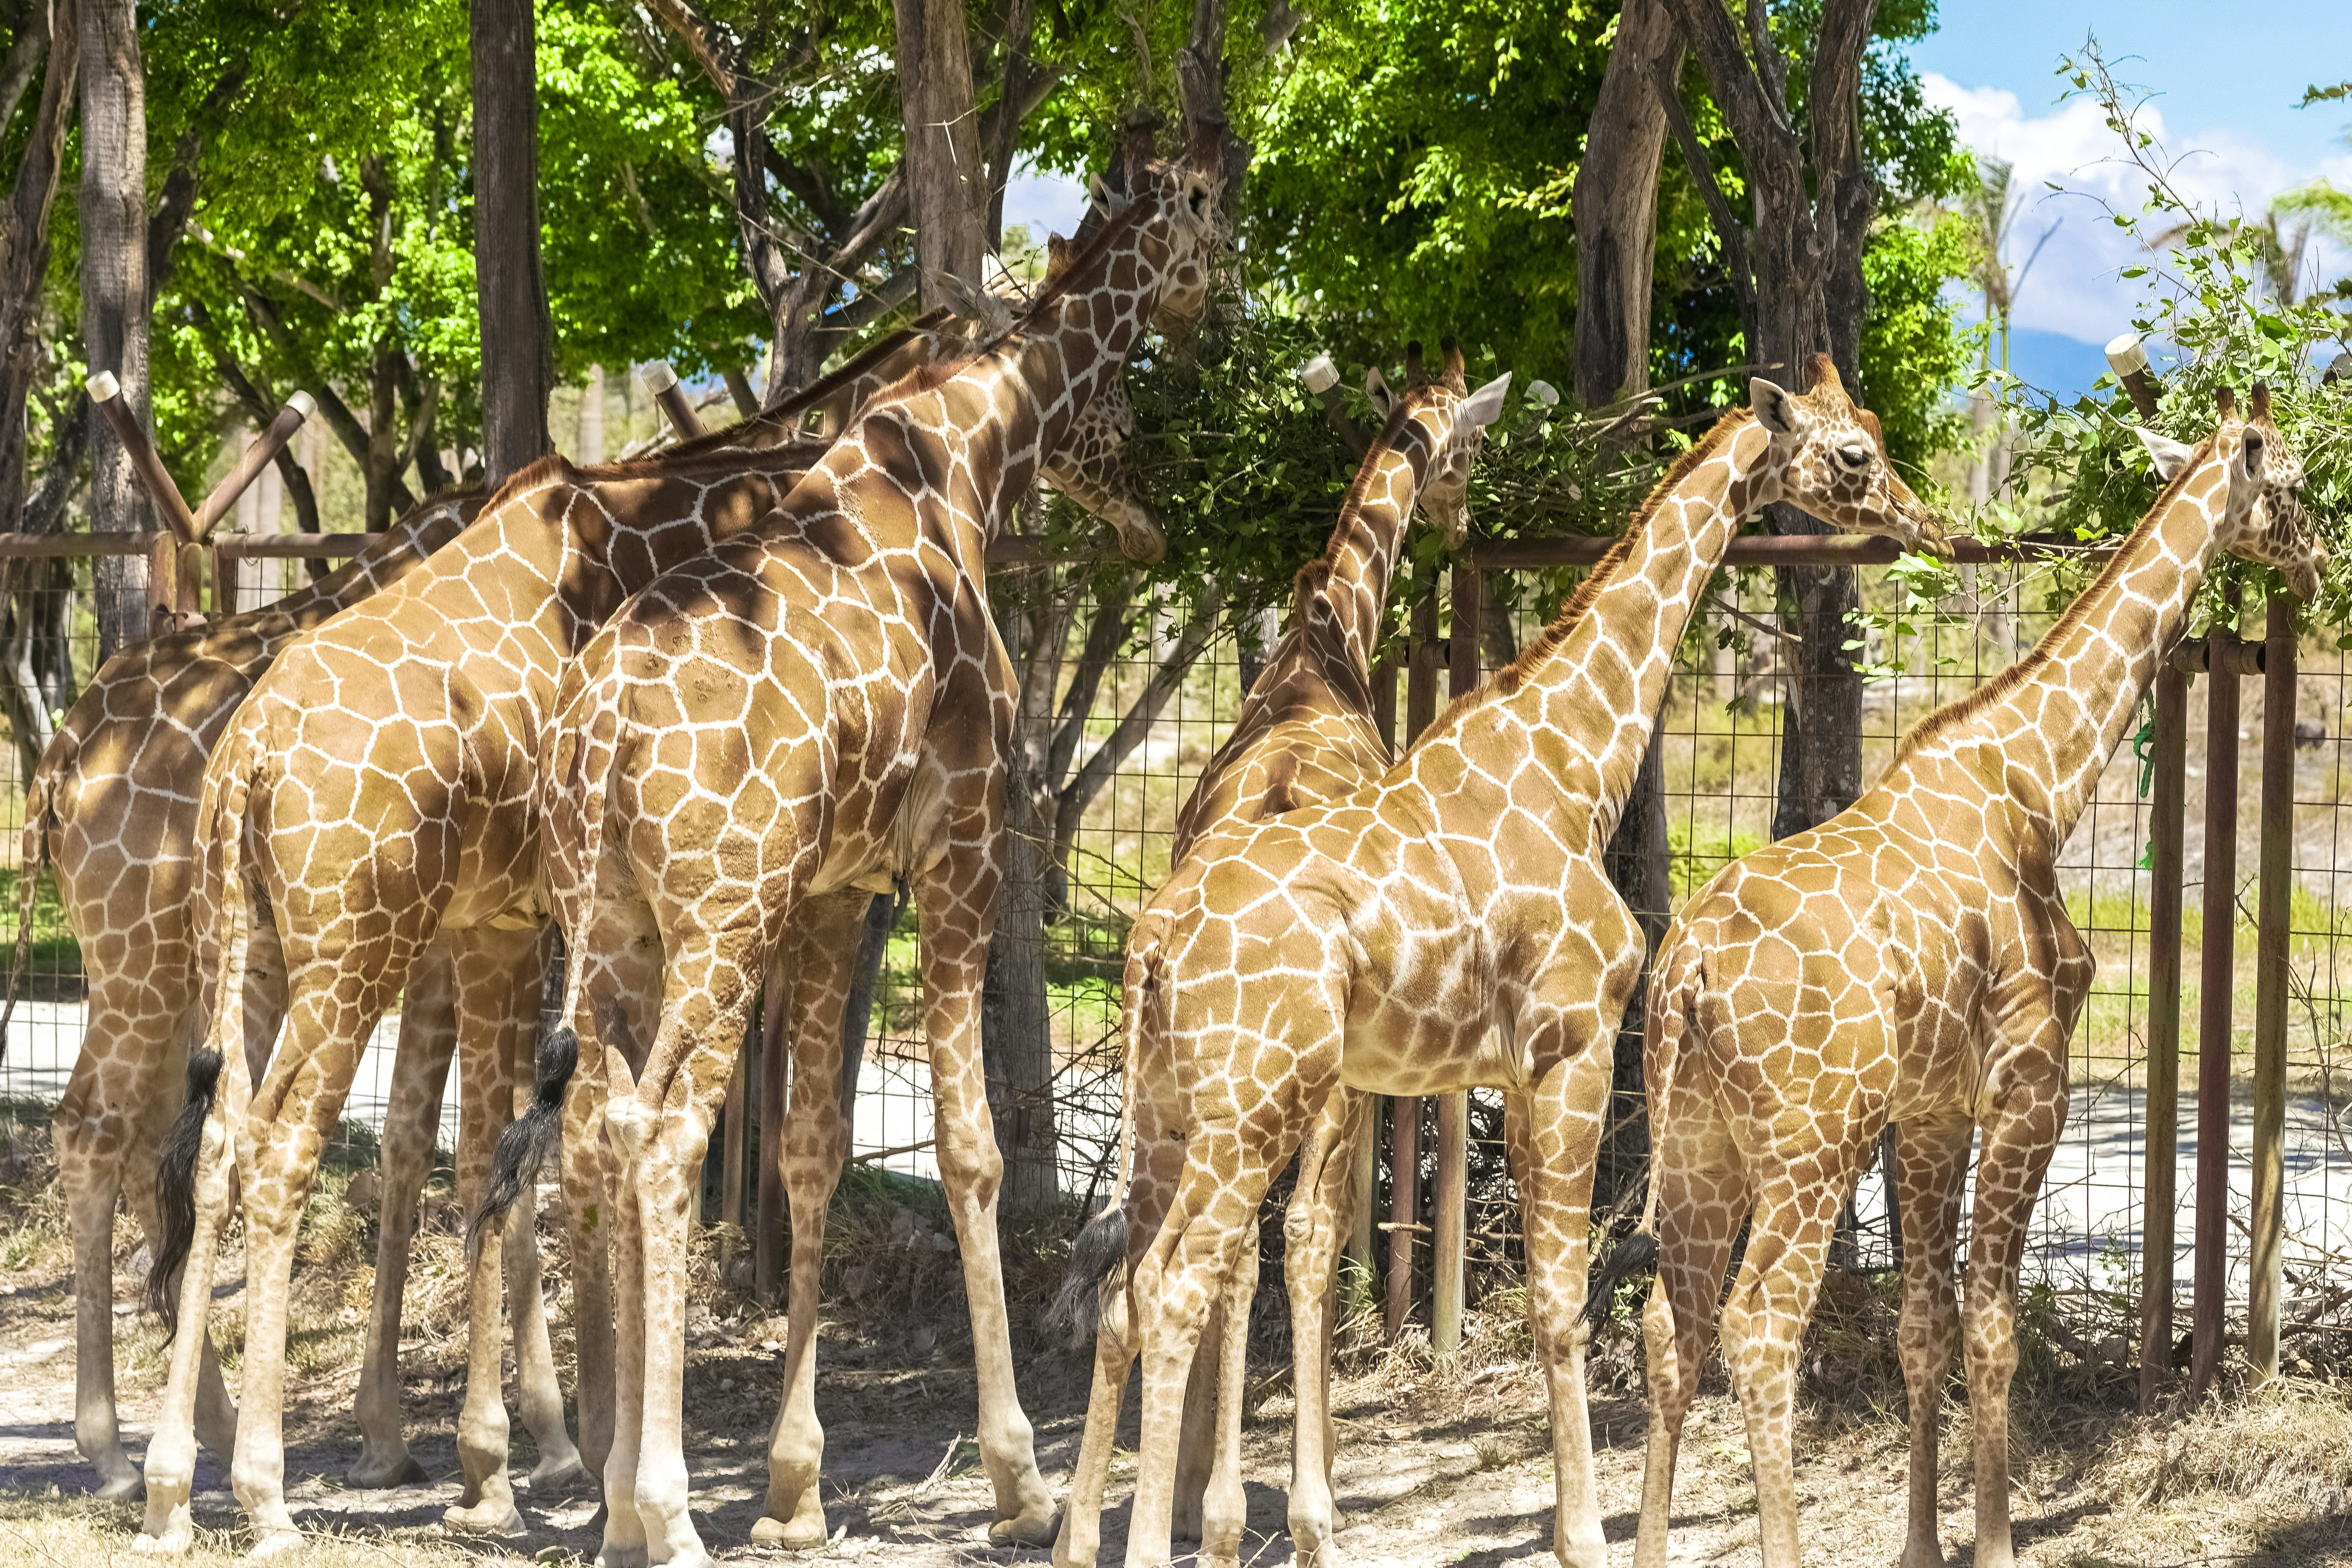 group of giraffe on brown field surrounded by green trees during daytime